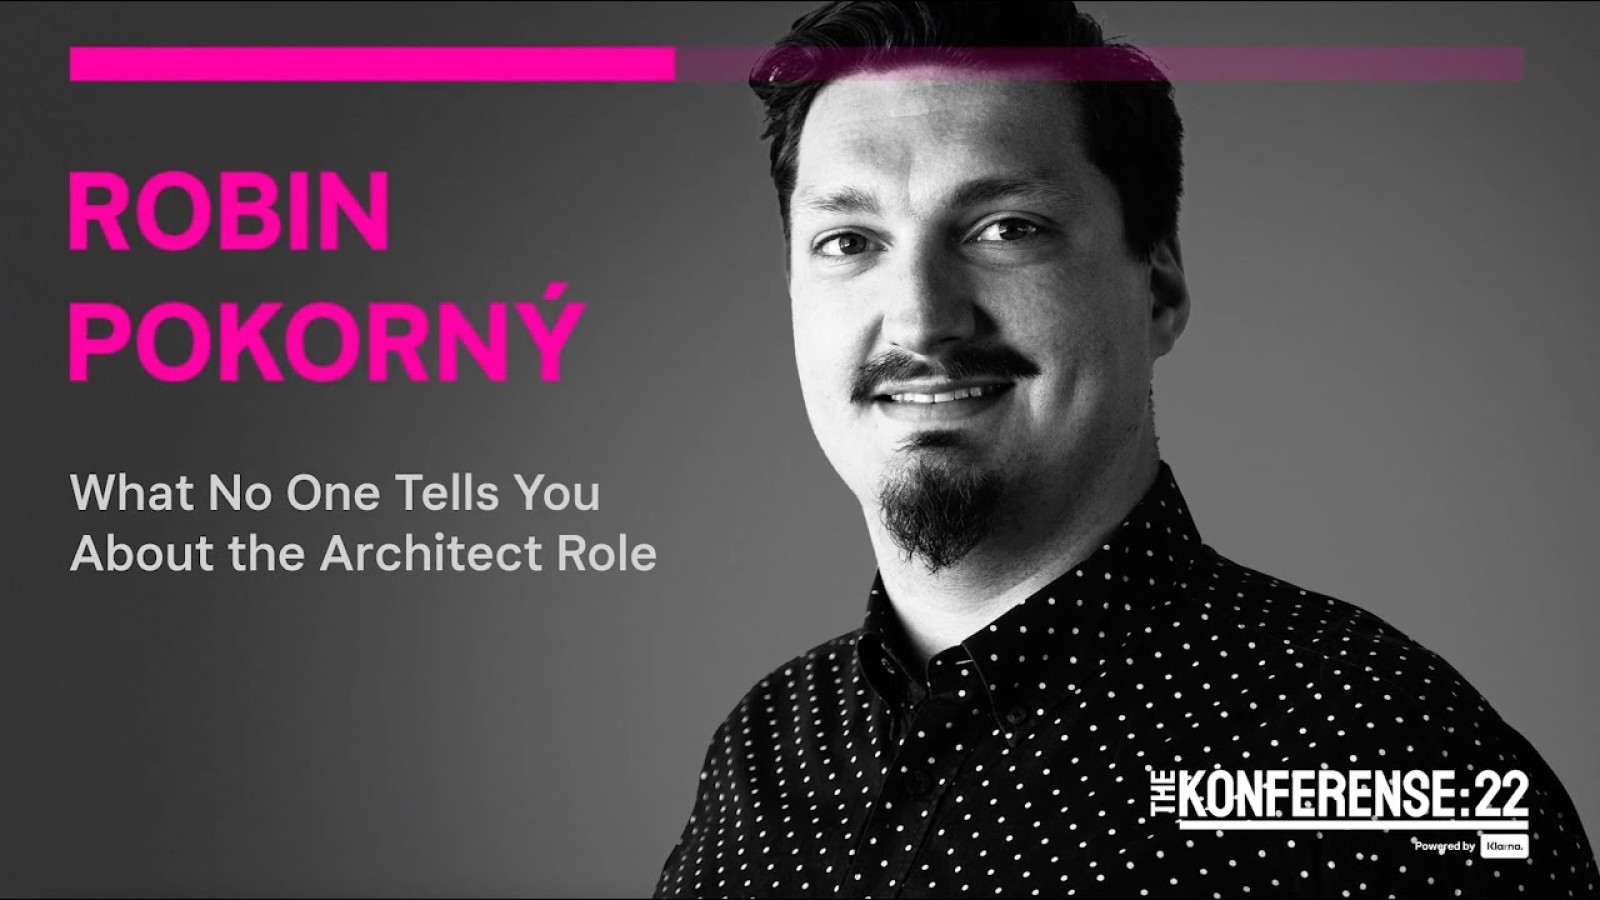 What no one tells you about the architect role